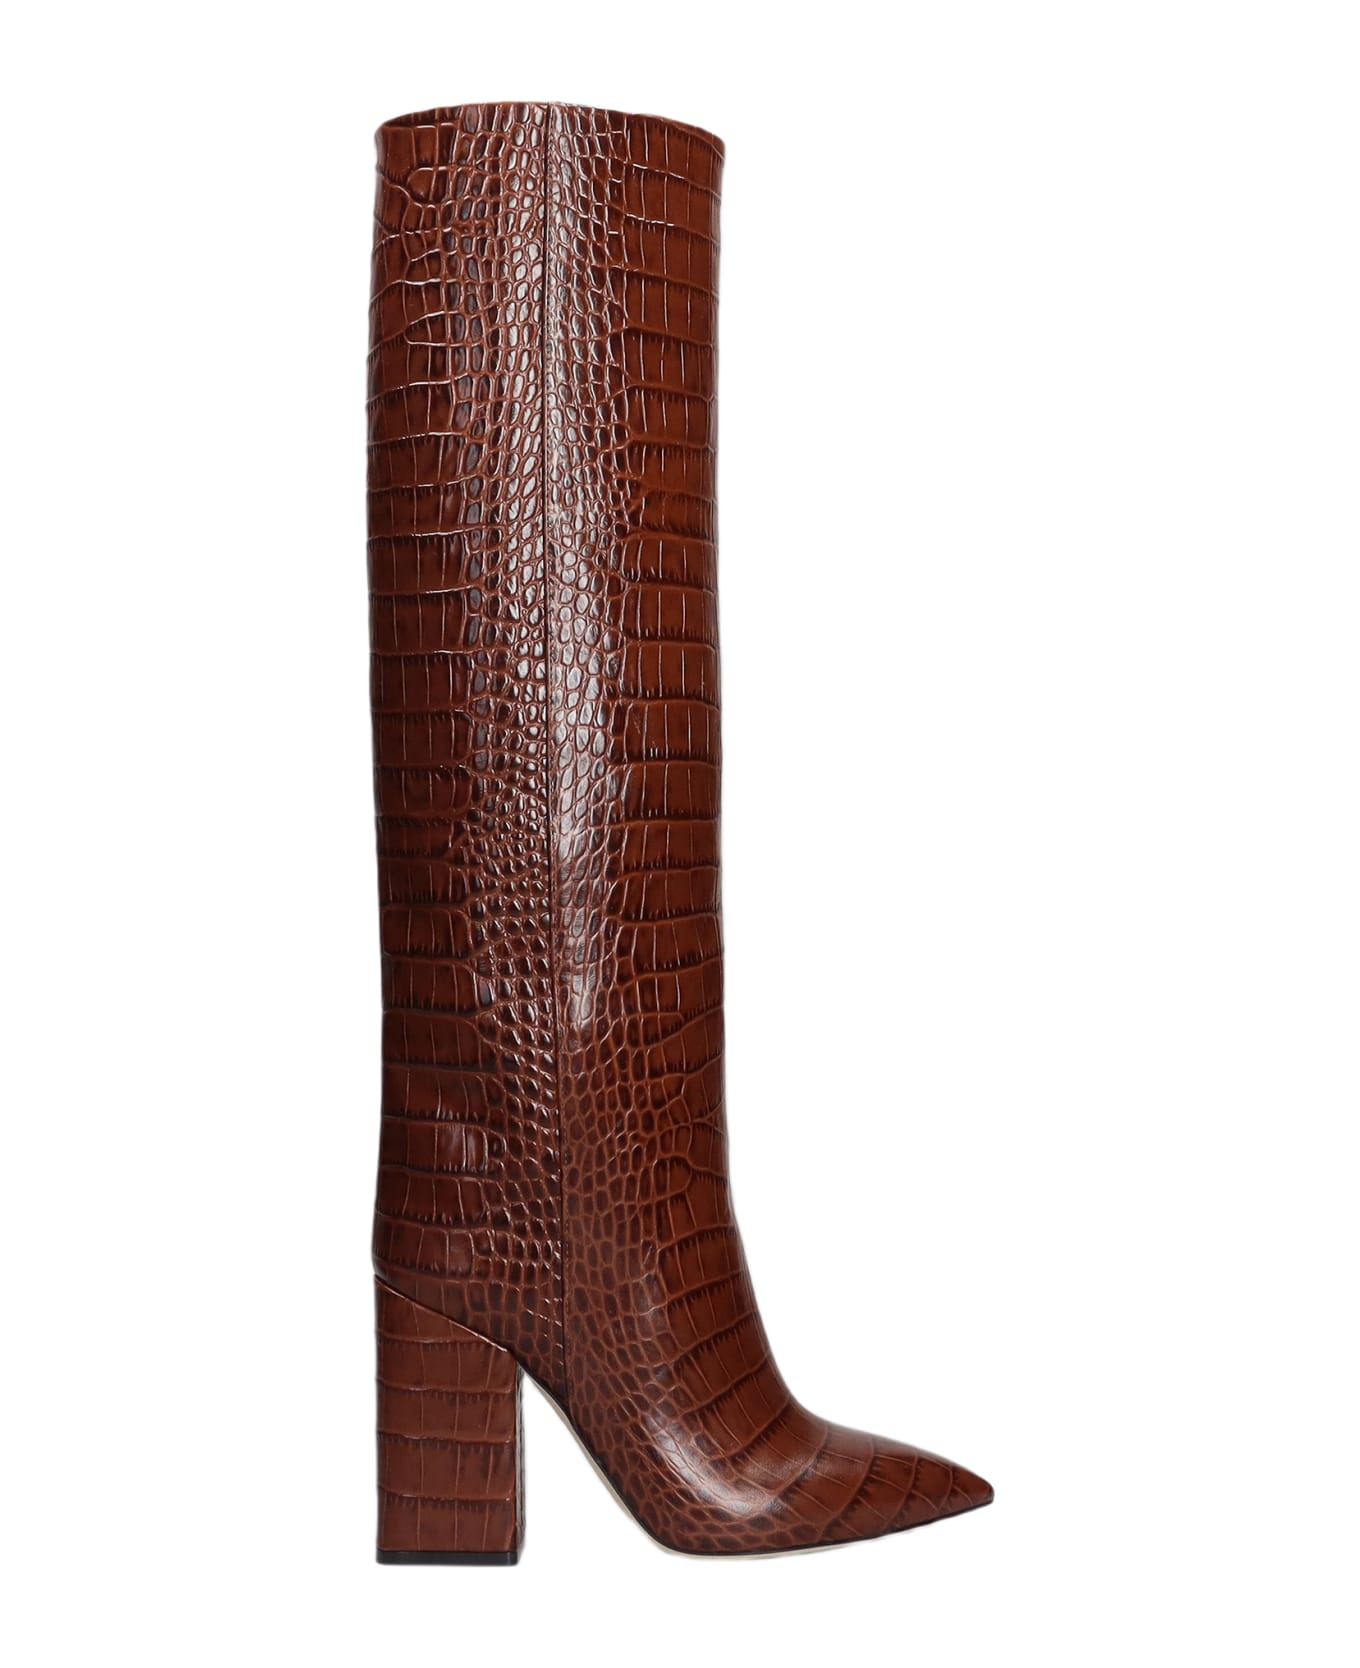 Paris Texas Anja High Heels Boots In Brown Leather - brown ブーツ